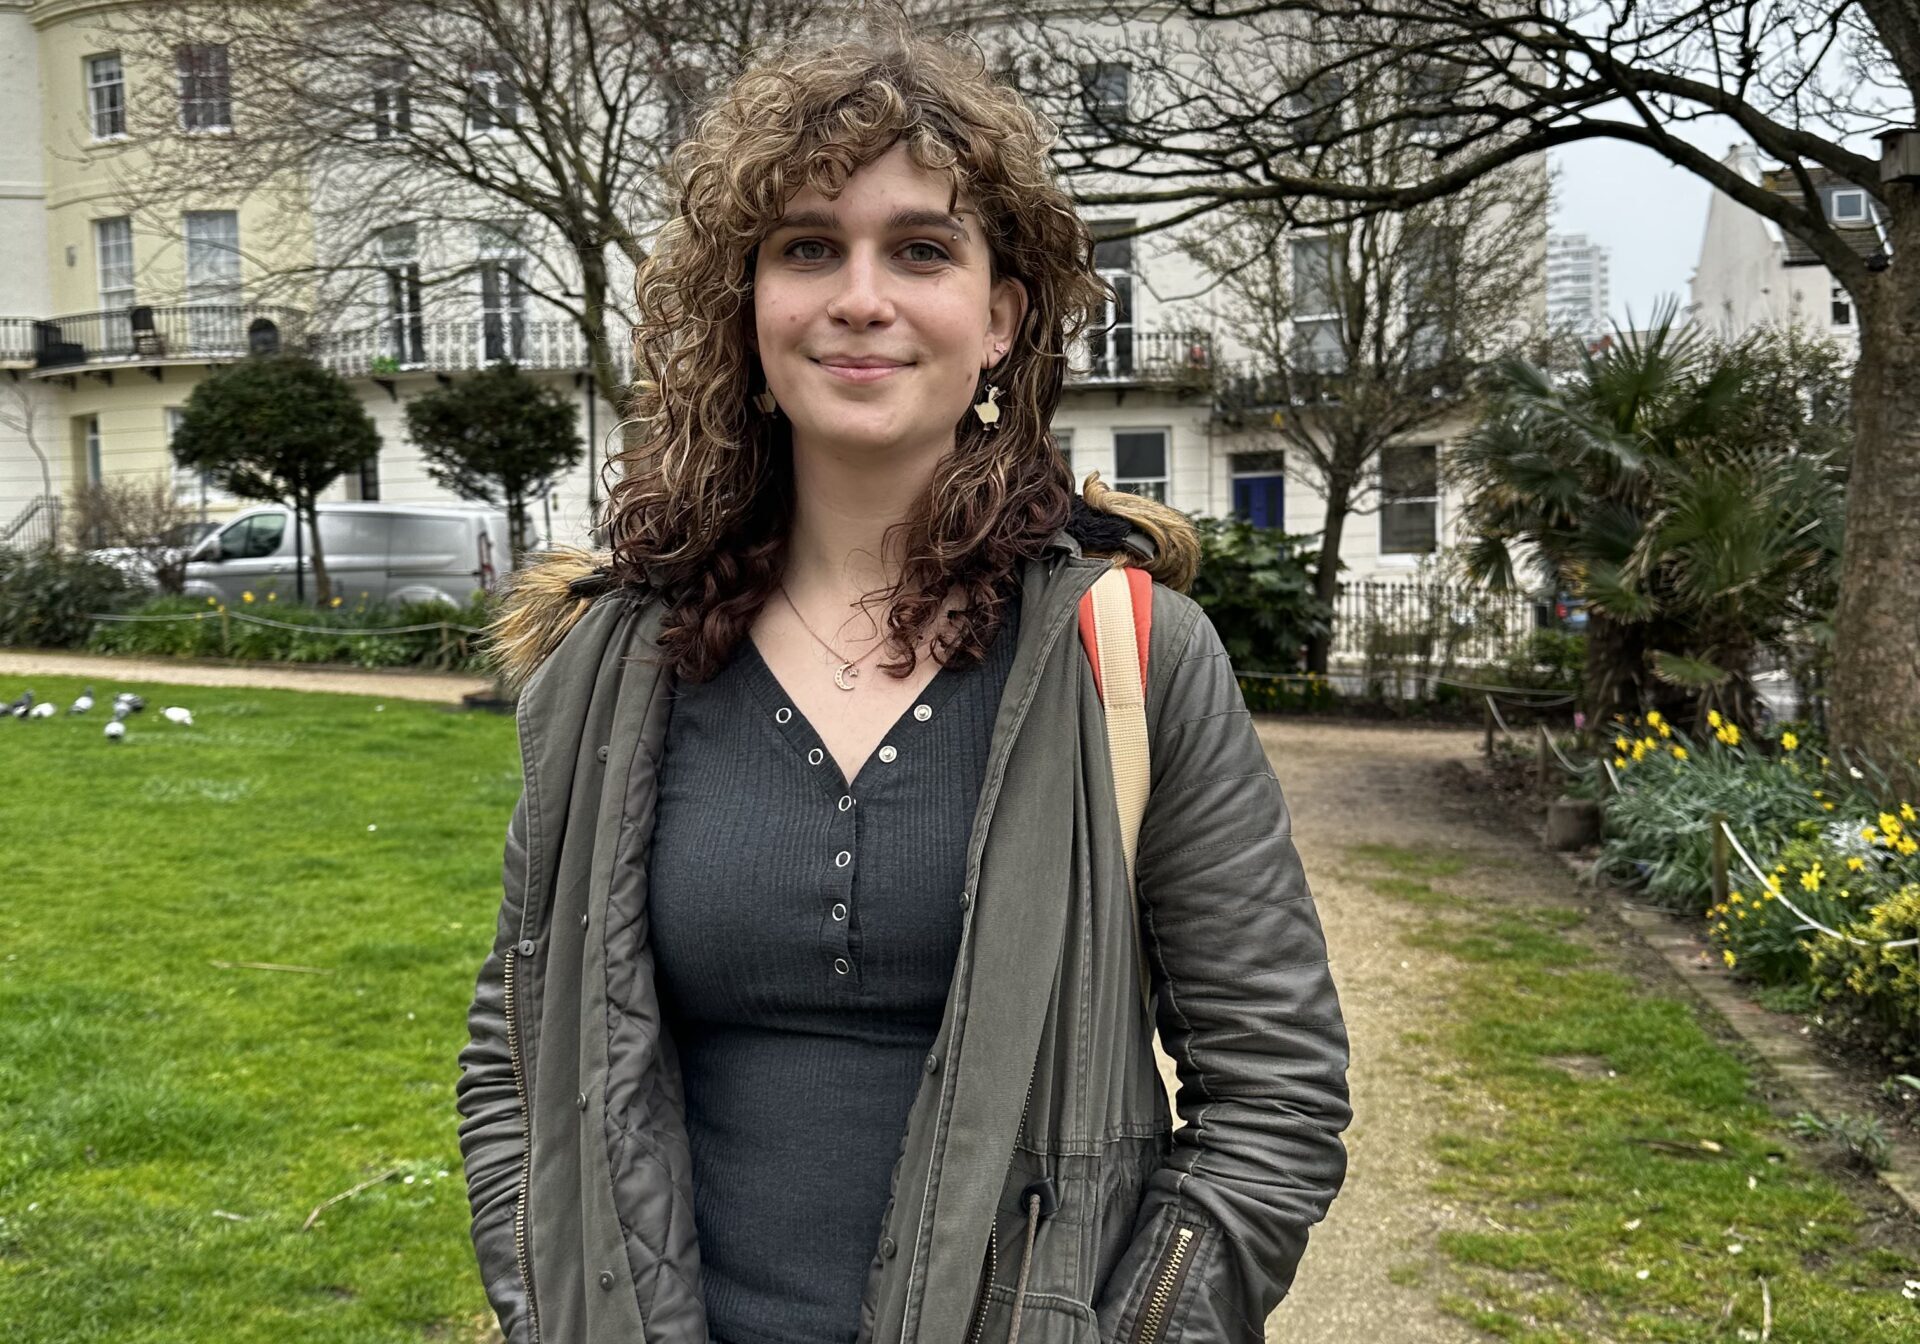 Chloë_Goldsmith_Regency_candidate_for_Green_Party